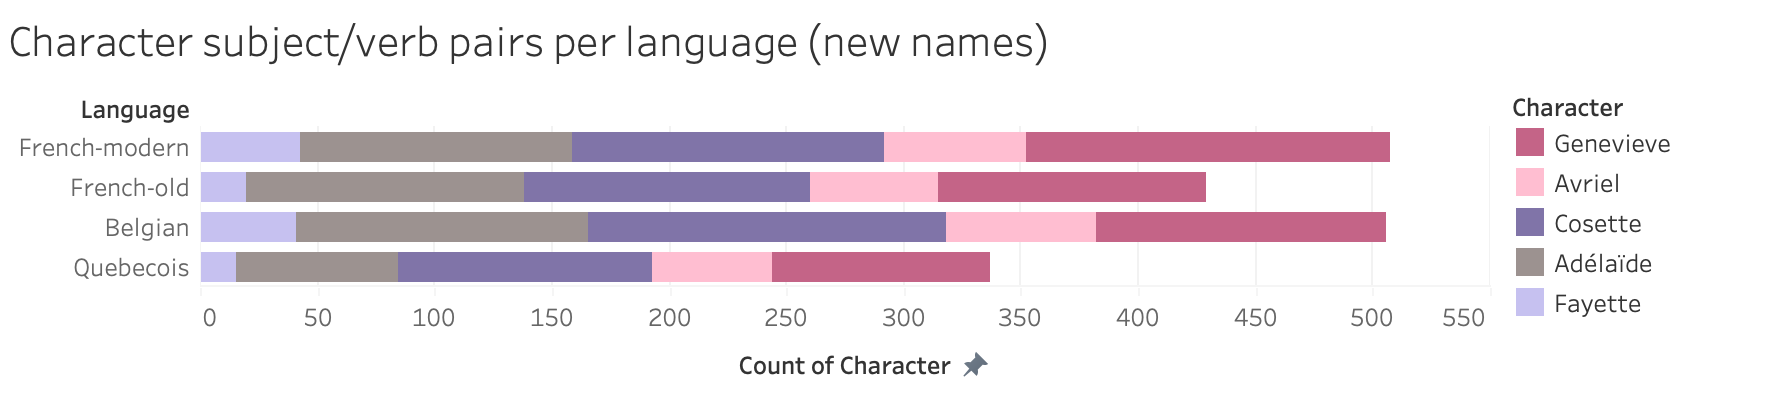 Chart showing how many verb/character pairs there are per language with old and new names.